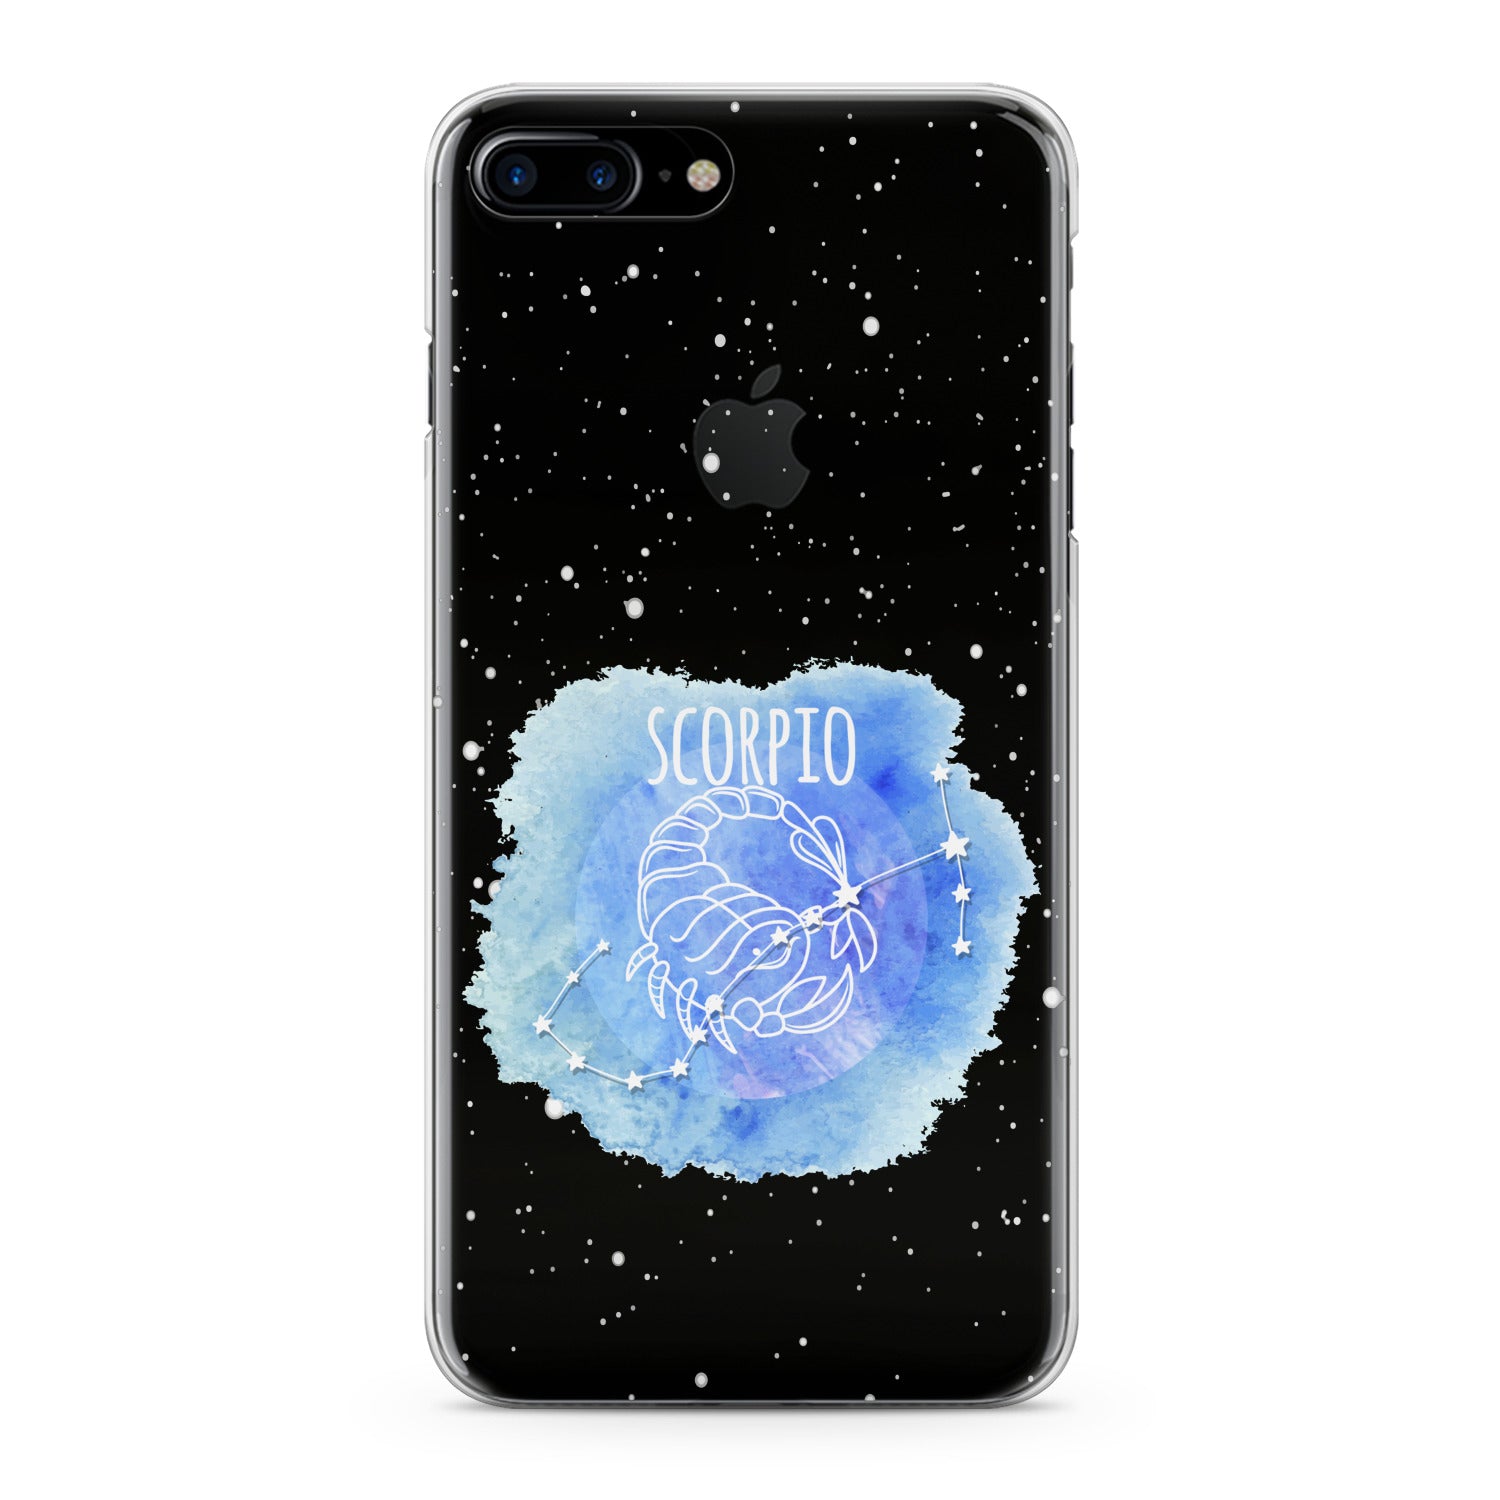 Lex Altern Scorpio Zodiac Phone Case for your iPhone & Android phone.